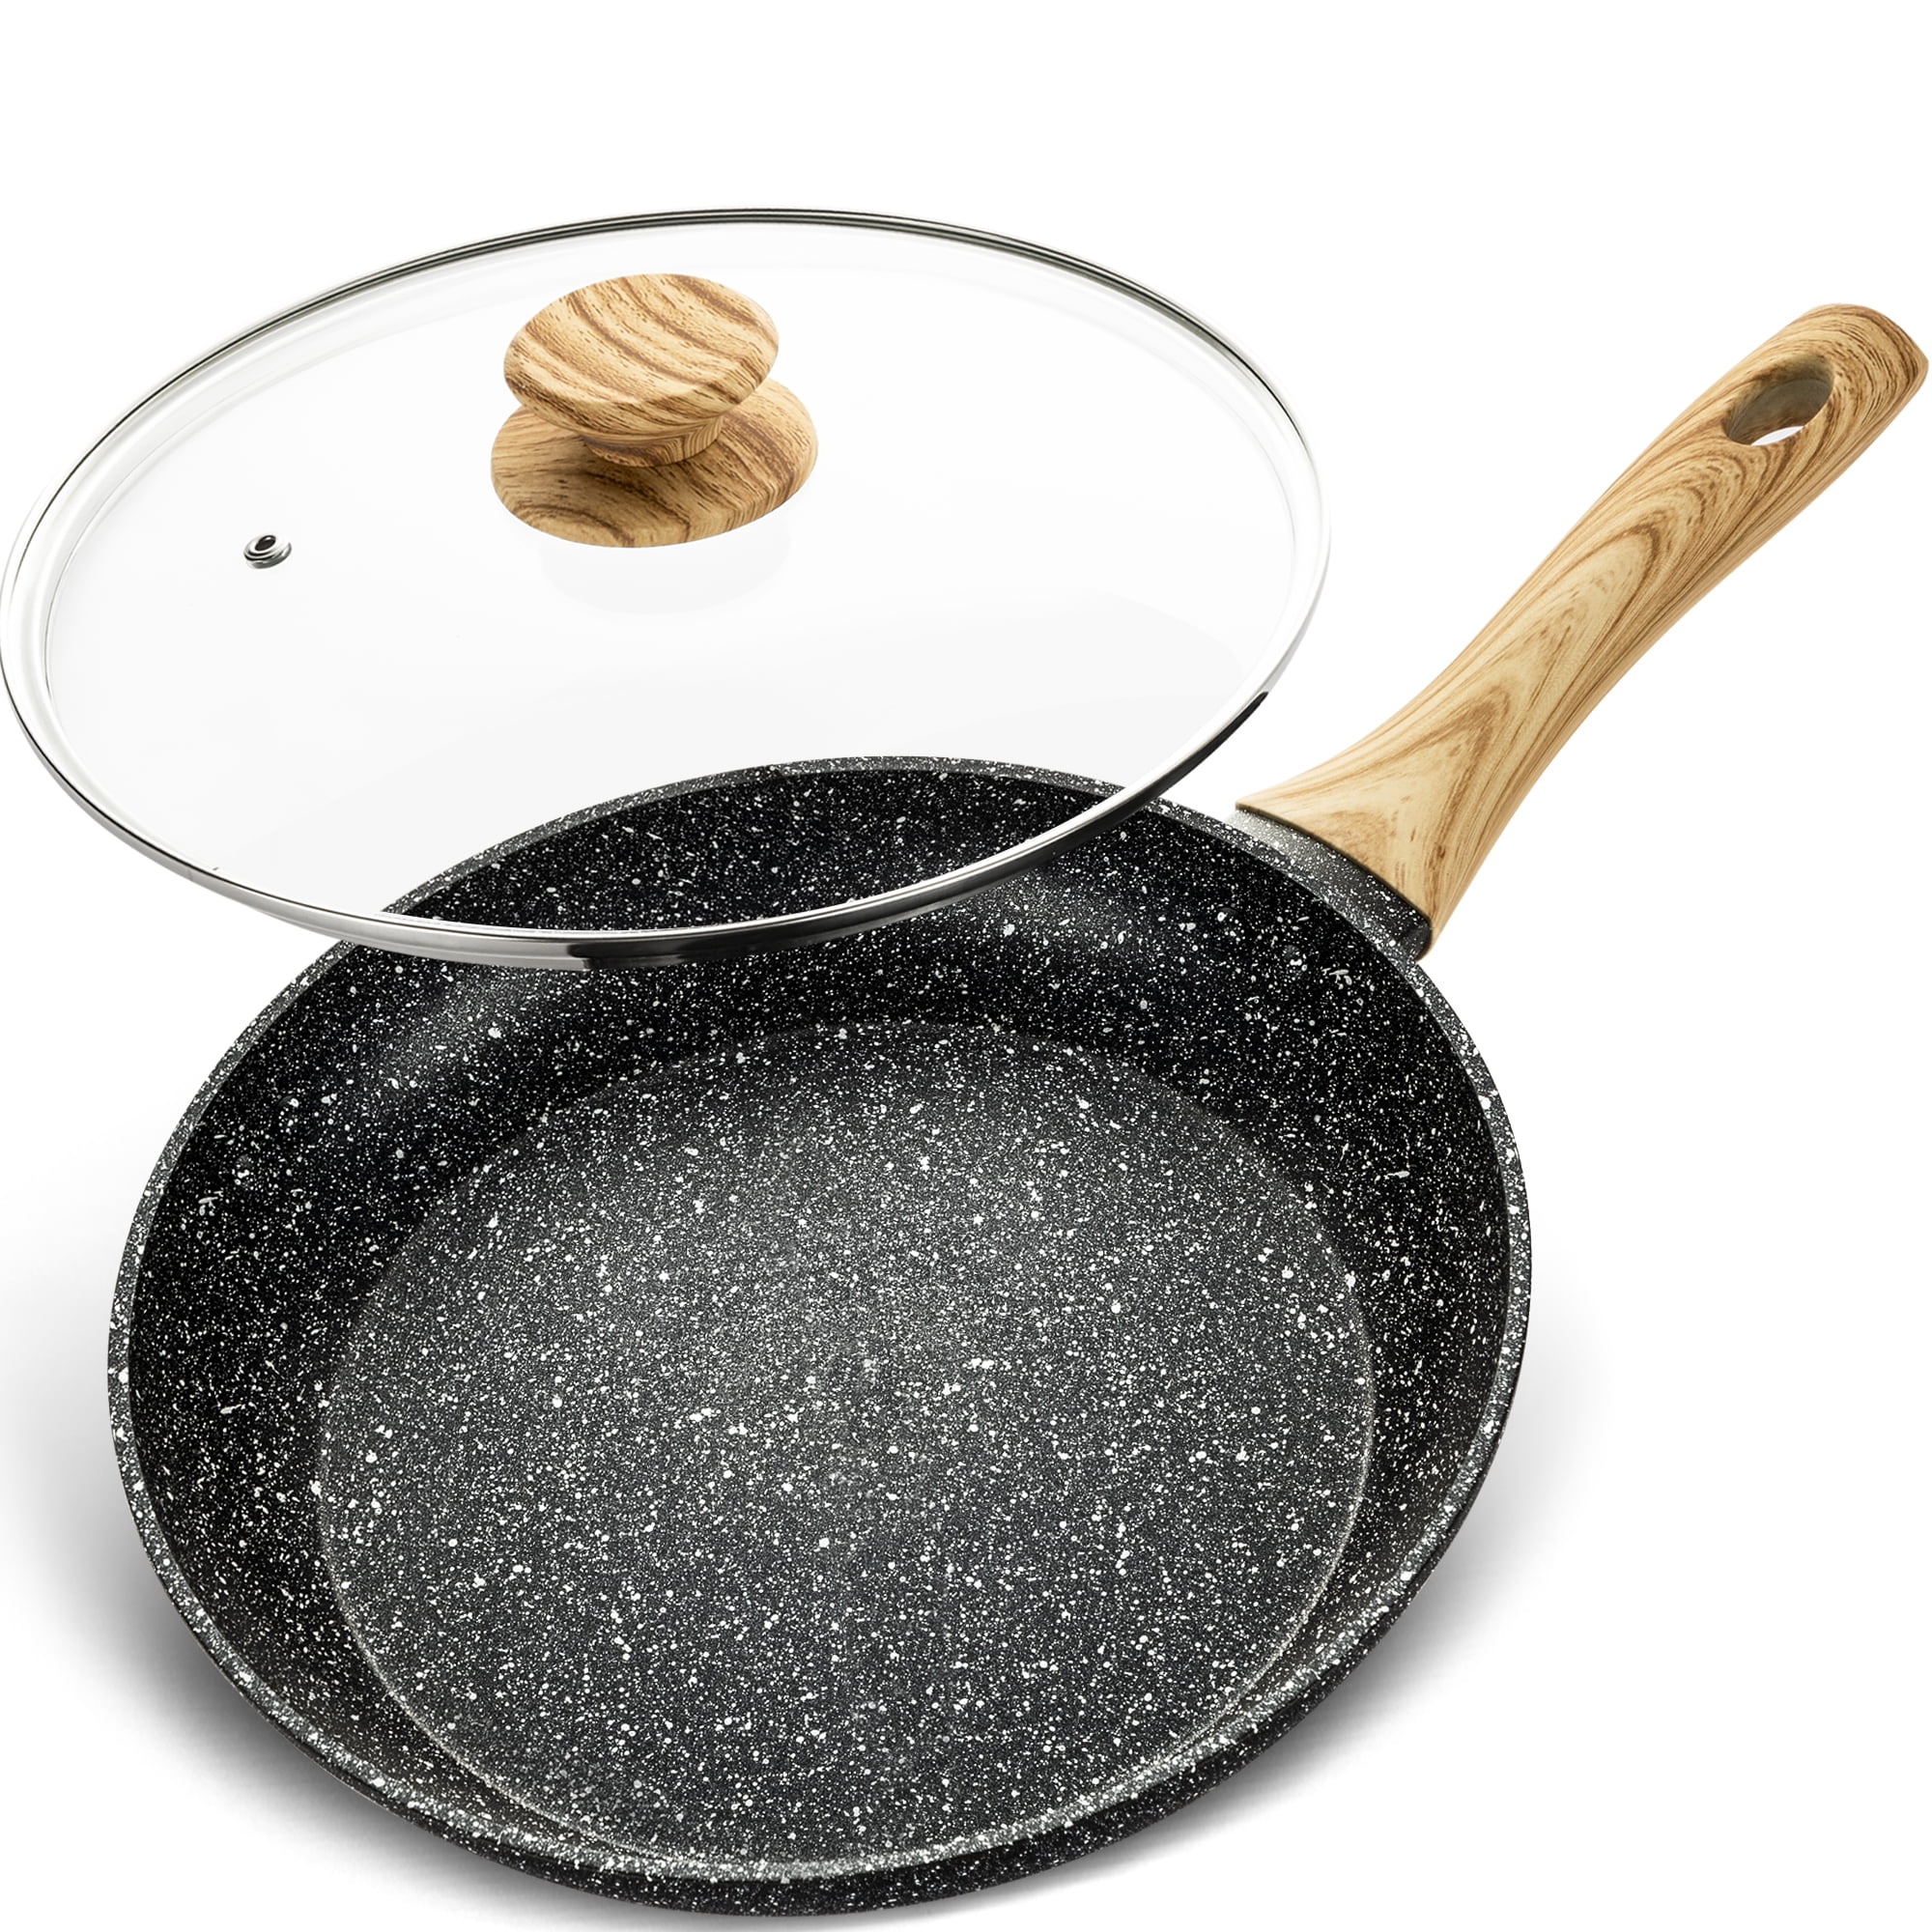 HLAFRG 10 inch Nonstick Frying Pan with Lid,Black Marble Cookware, Stone-Derived Coating, Non Toxic APEO & PFOA Free, with Heat-Resistant Handle